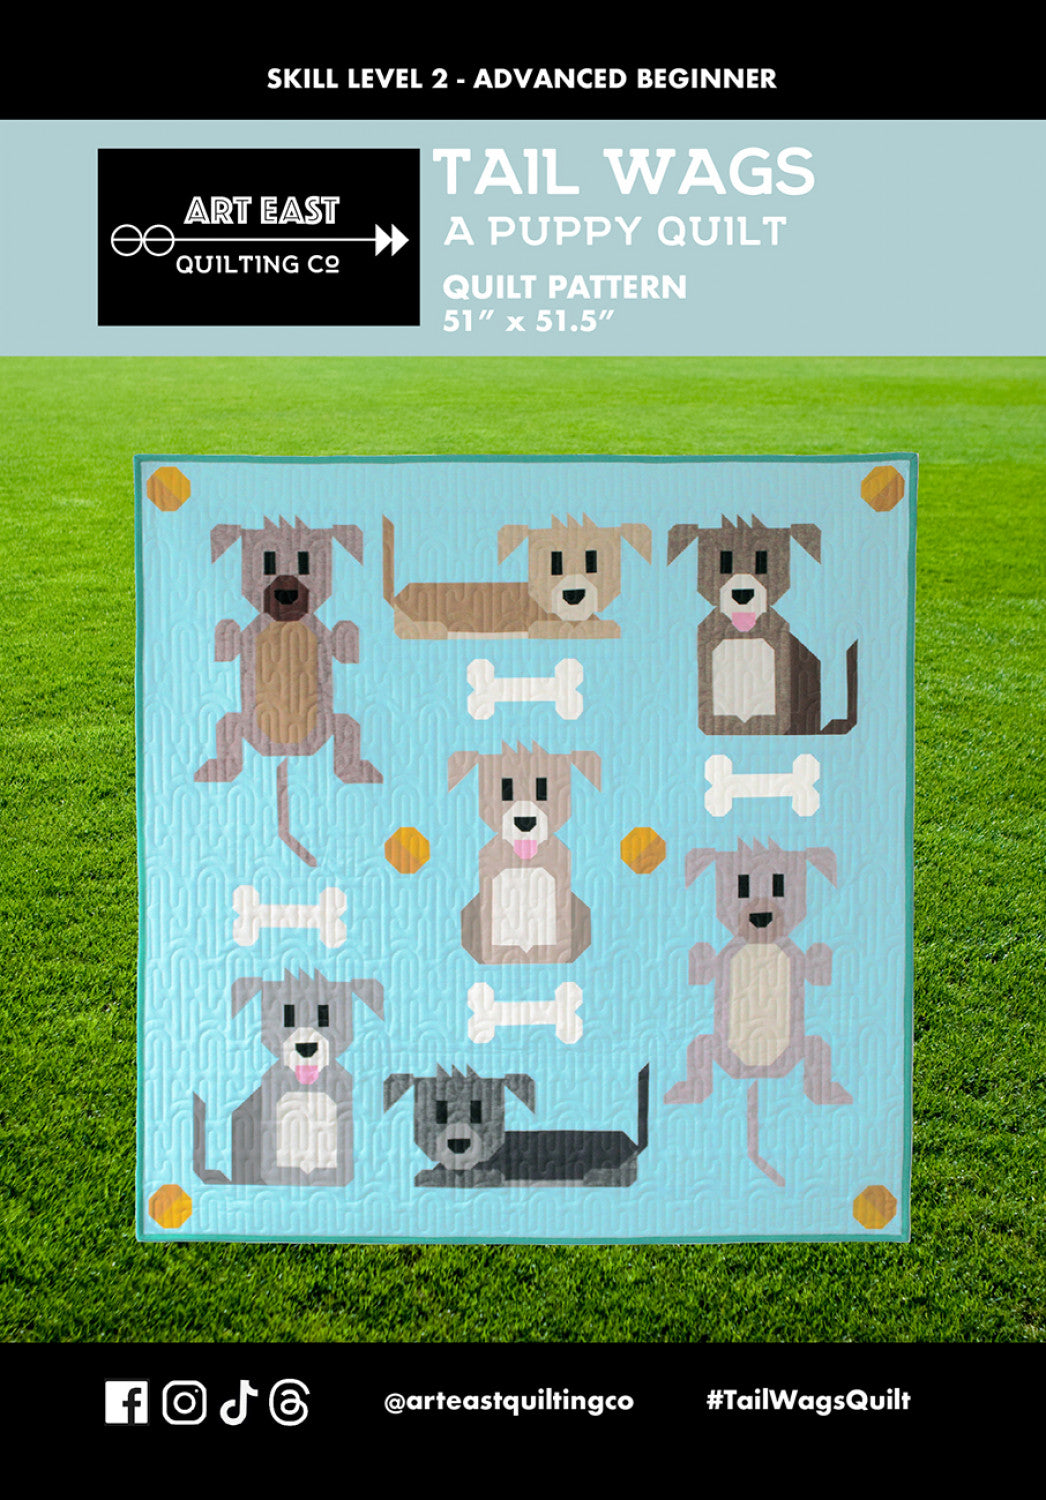 Tail Wags A Puppy Quilt Pattern - AETW1123 - Art East Quilting